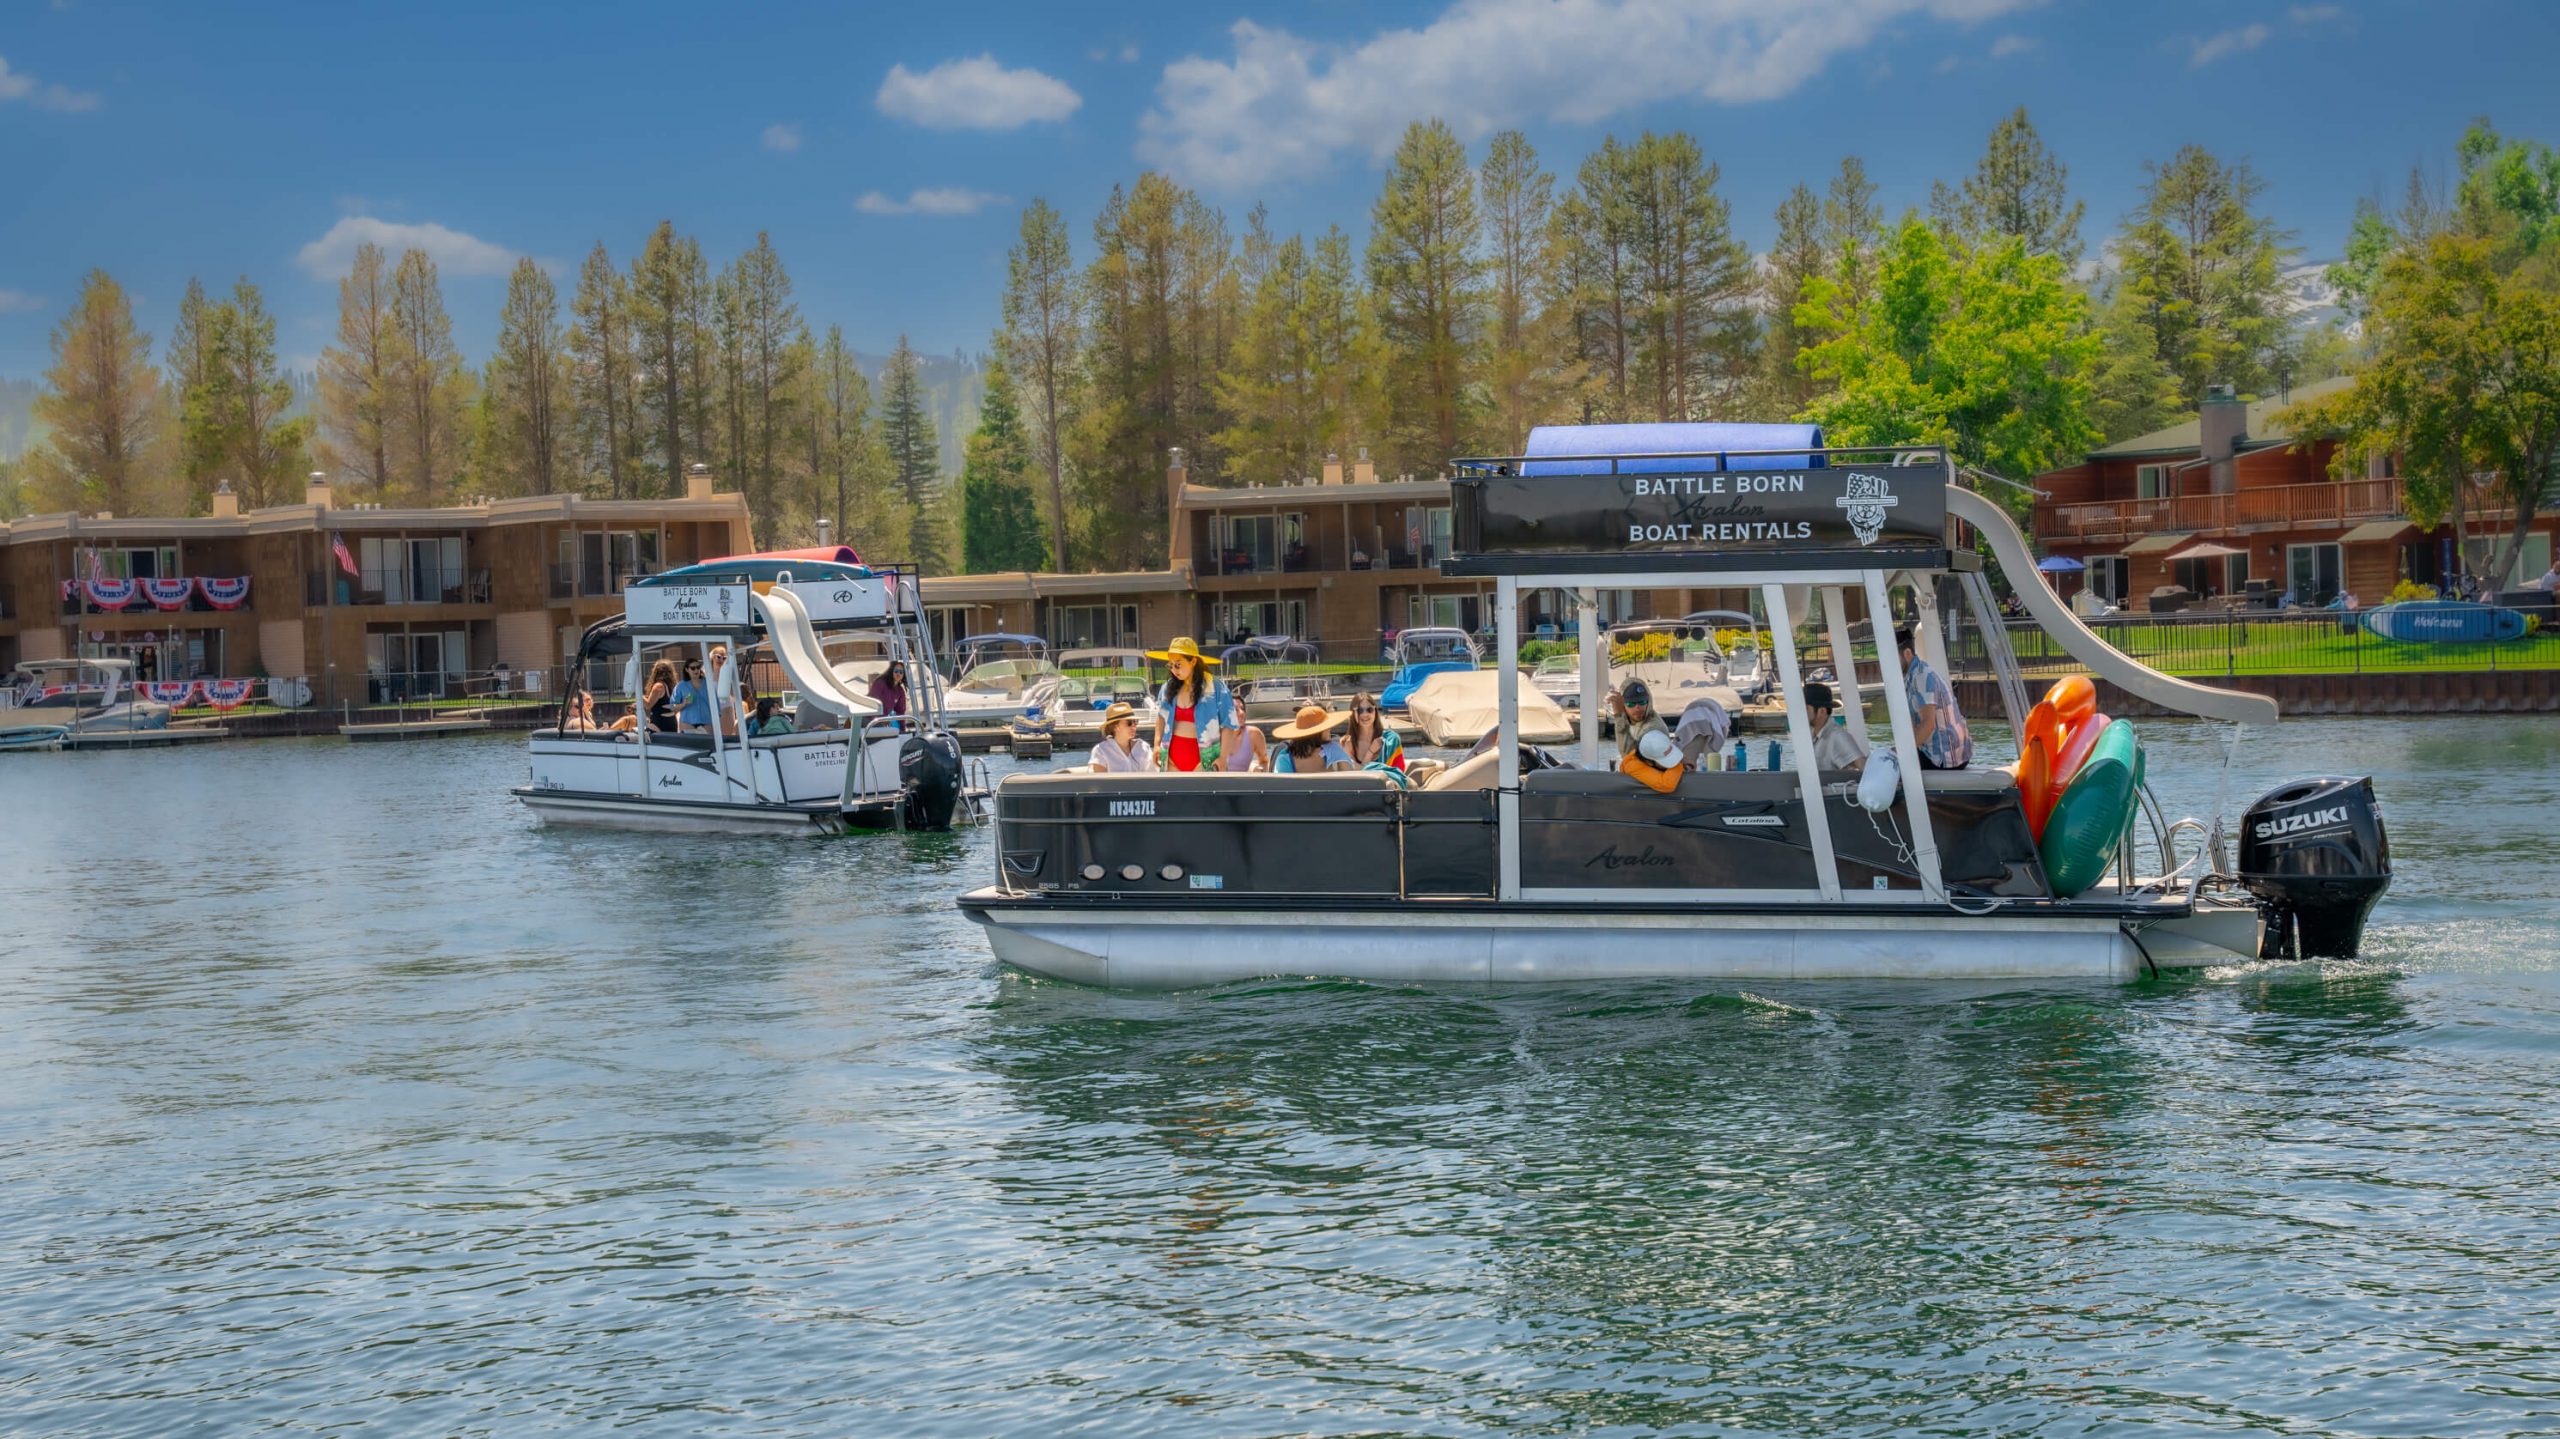 Battle Born Boat Rentals Launches Premier Boat Rental Service in South Lake Tahoe, California